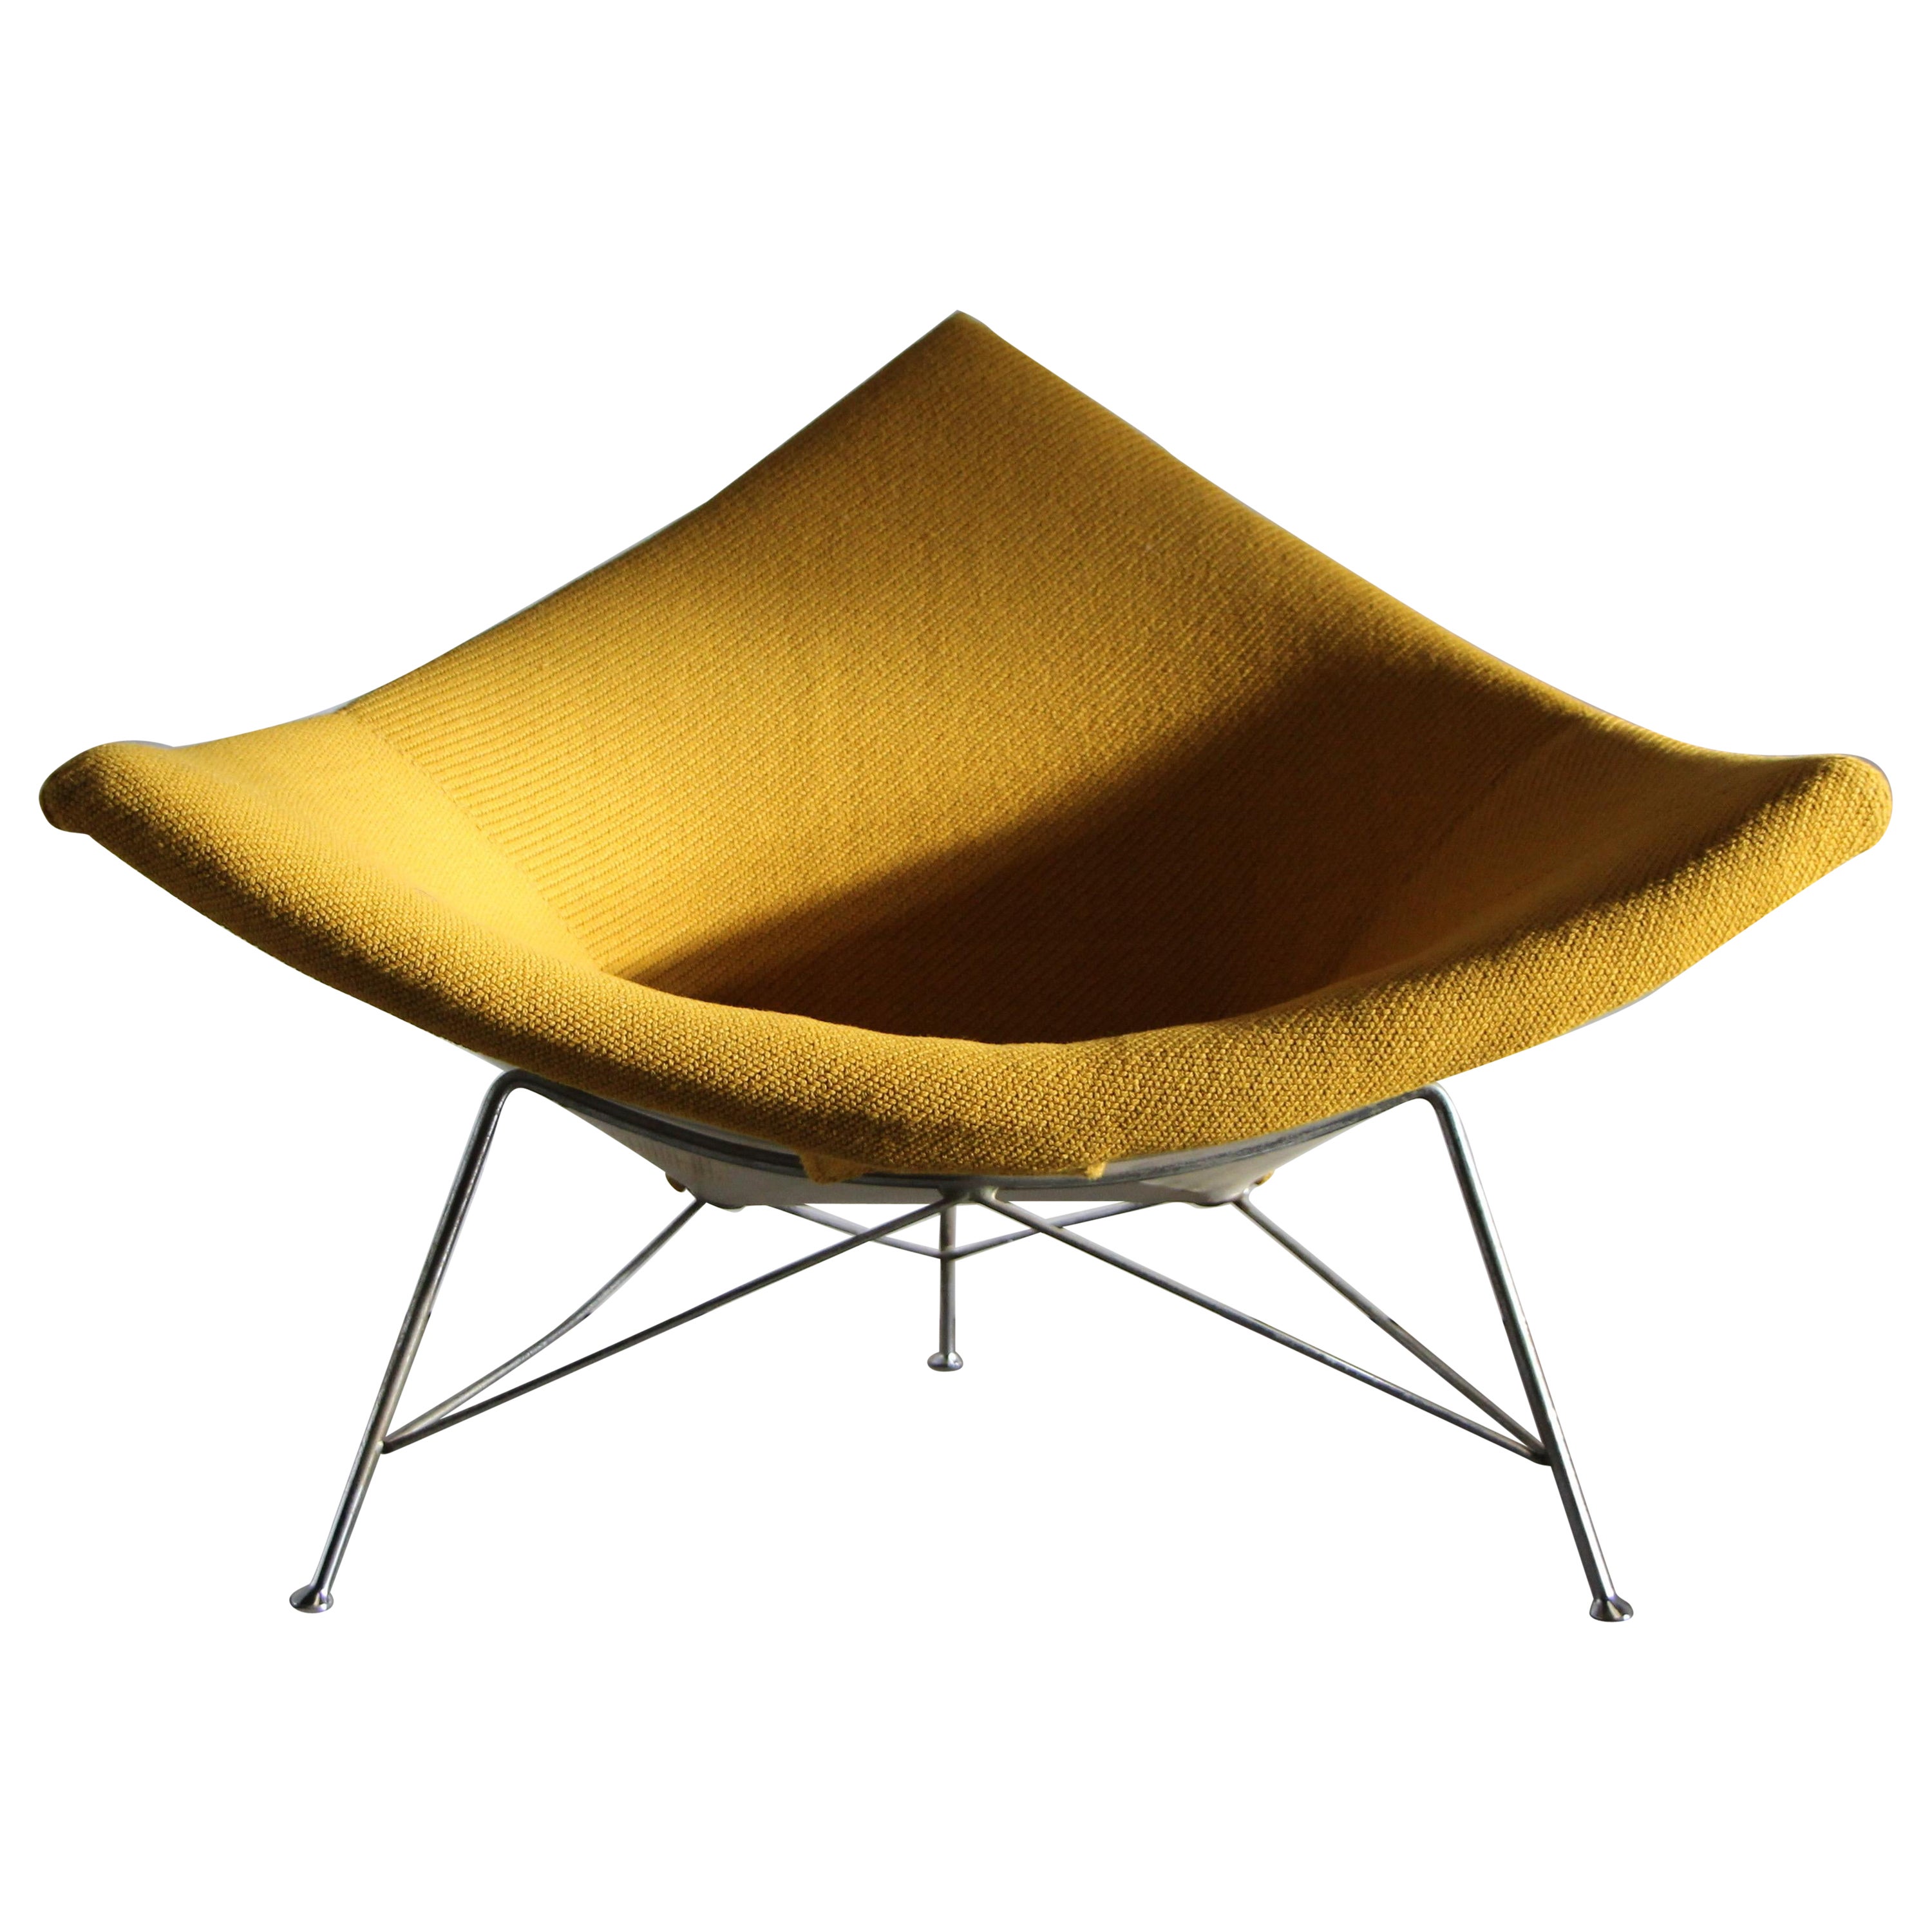 George Nelson, 1st Edition “Coconut” Chair in Mustard Wool, 1950s